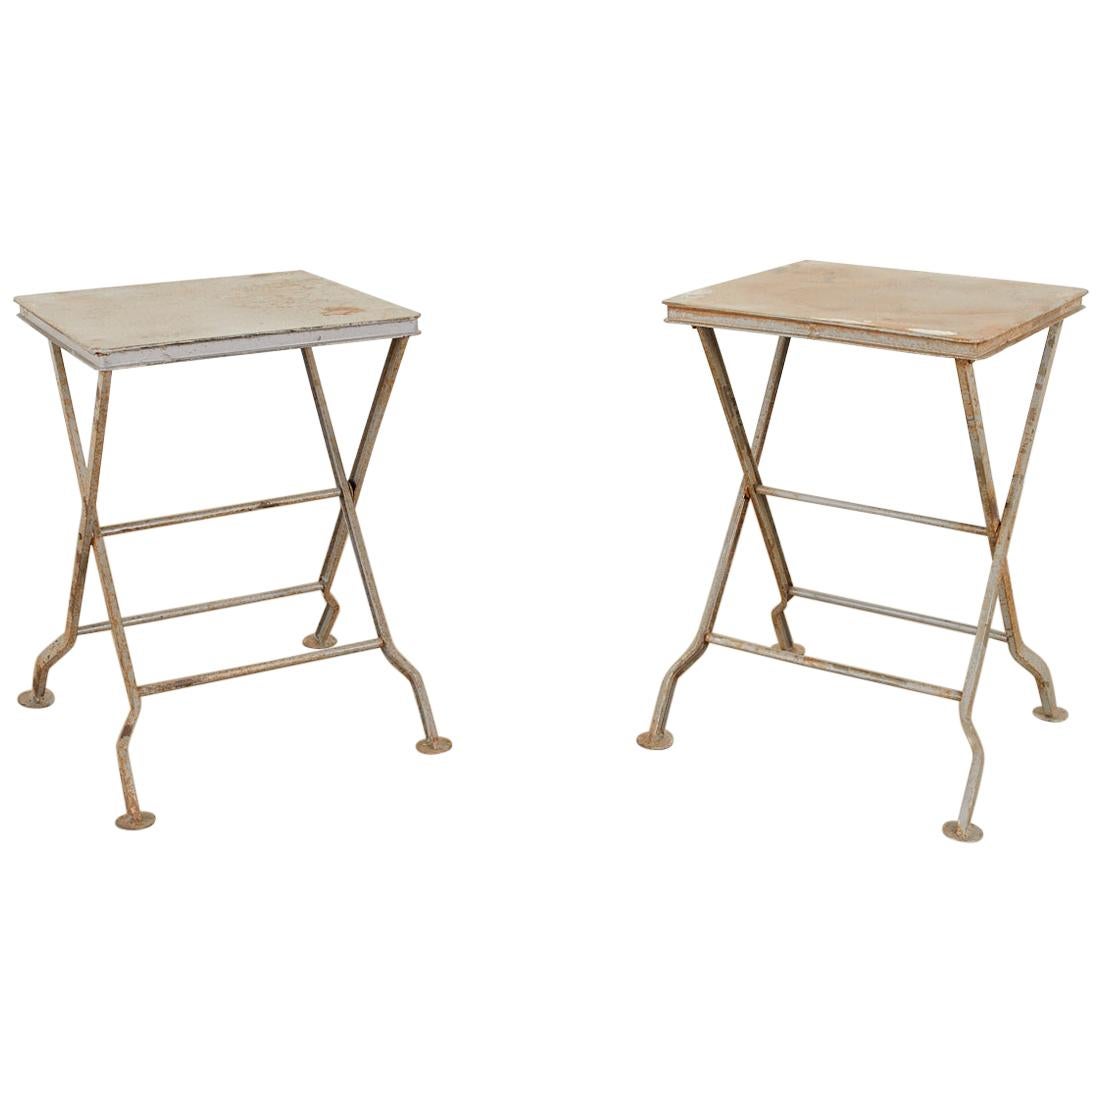 Pair of French Folding Iron Campaign Style Drink Tables